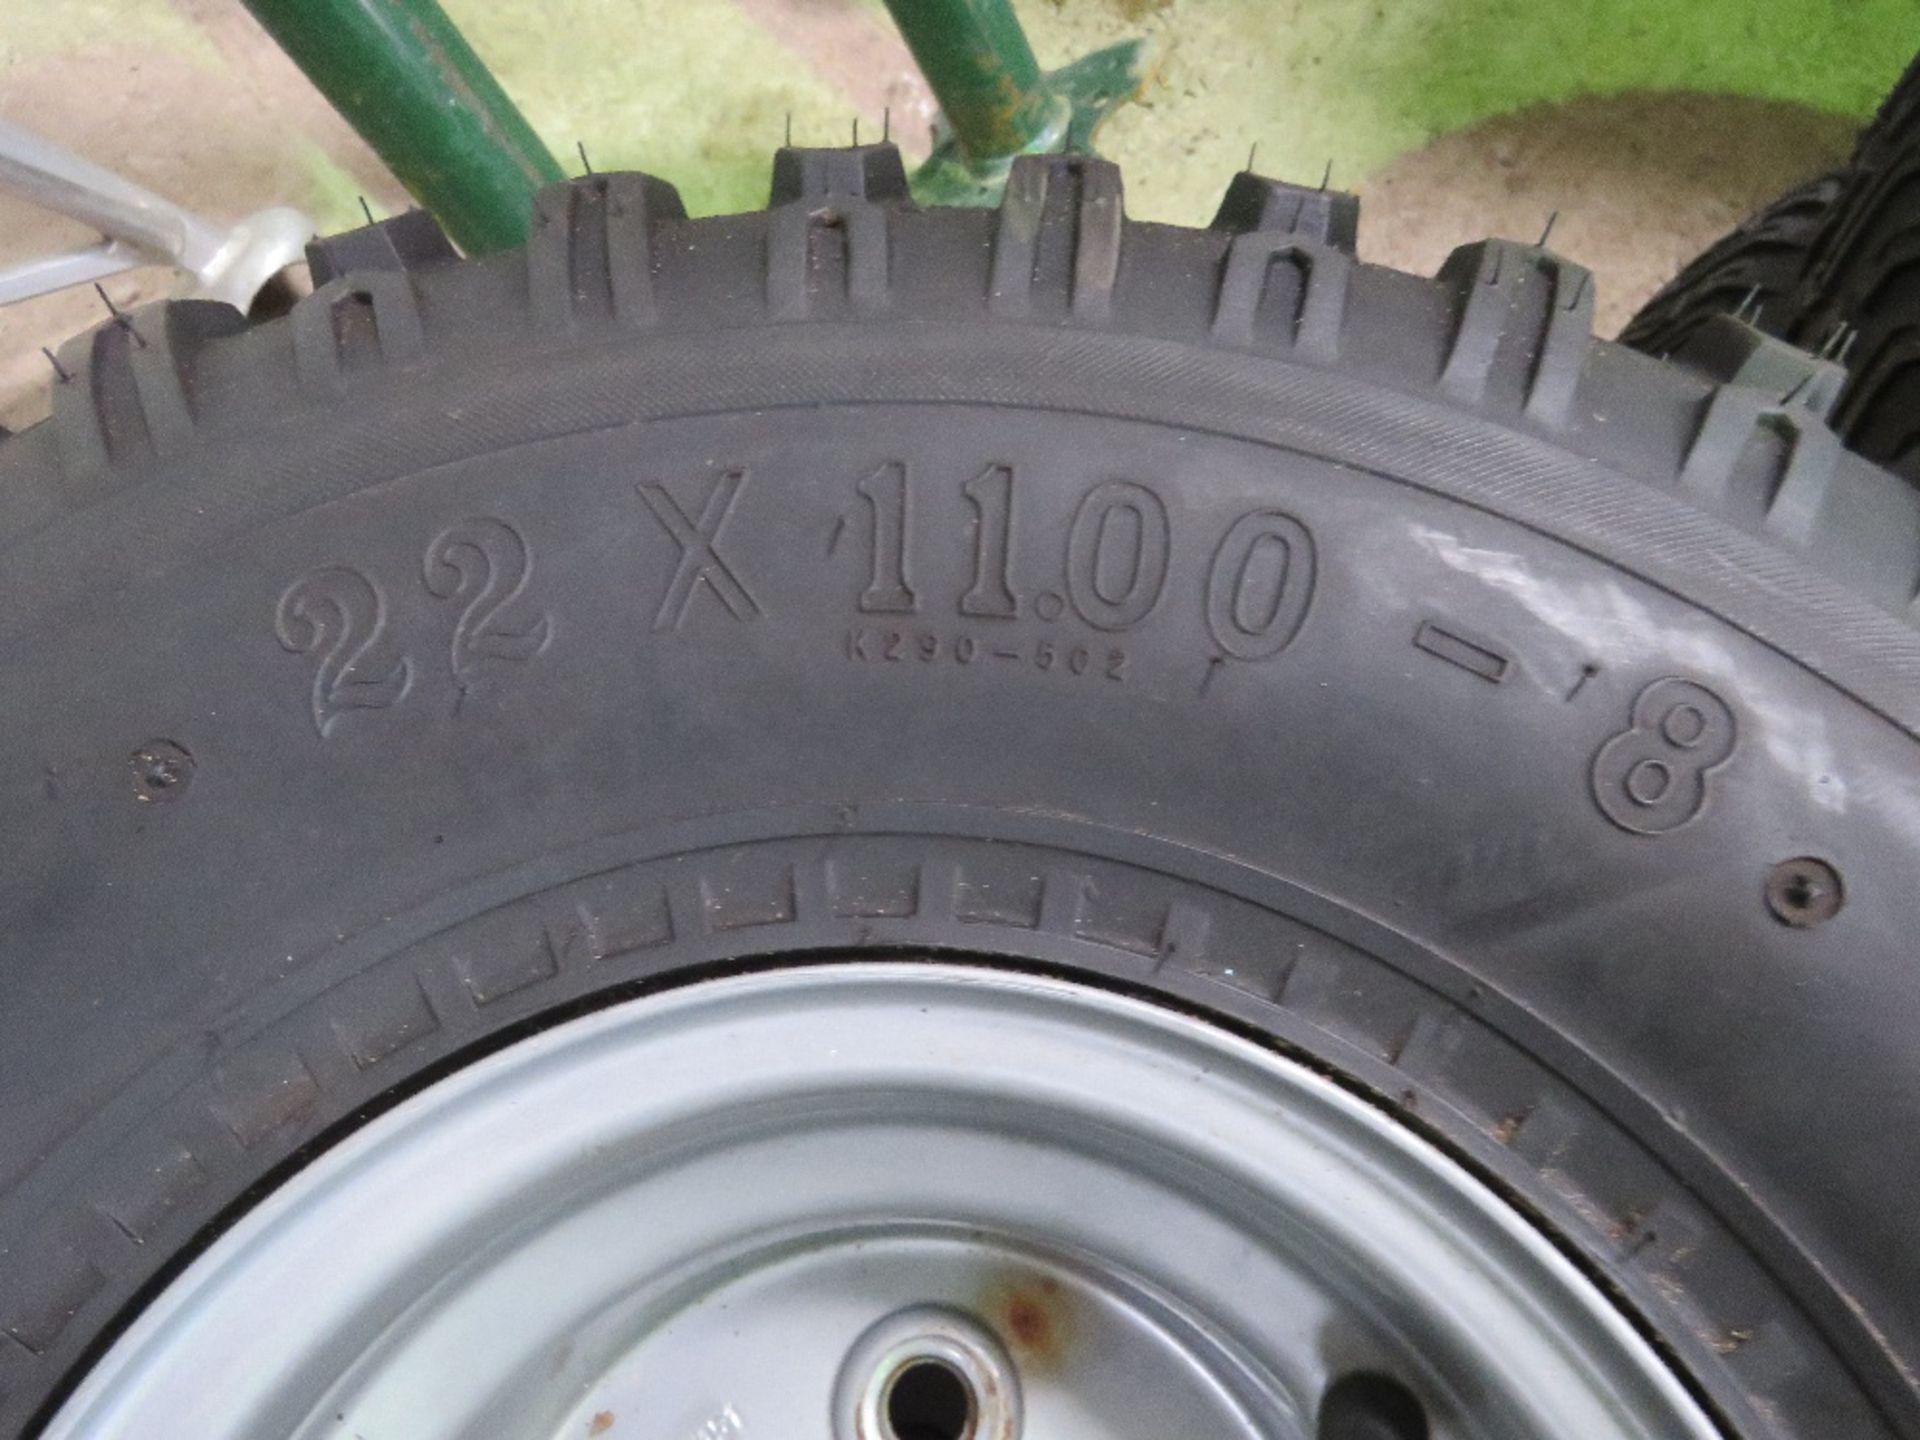 2 X 4 STUD WHEELS AND TYRES, 22X11.00 SIZE. - Image 3 of 4